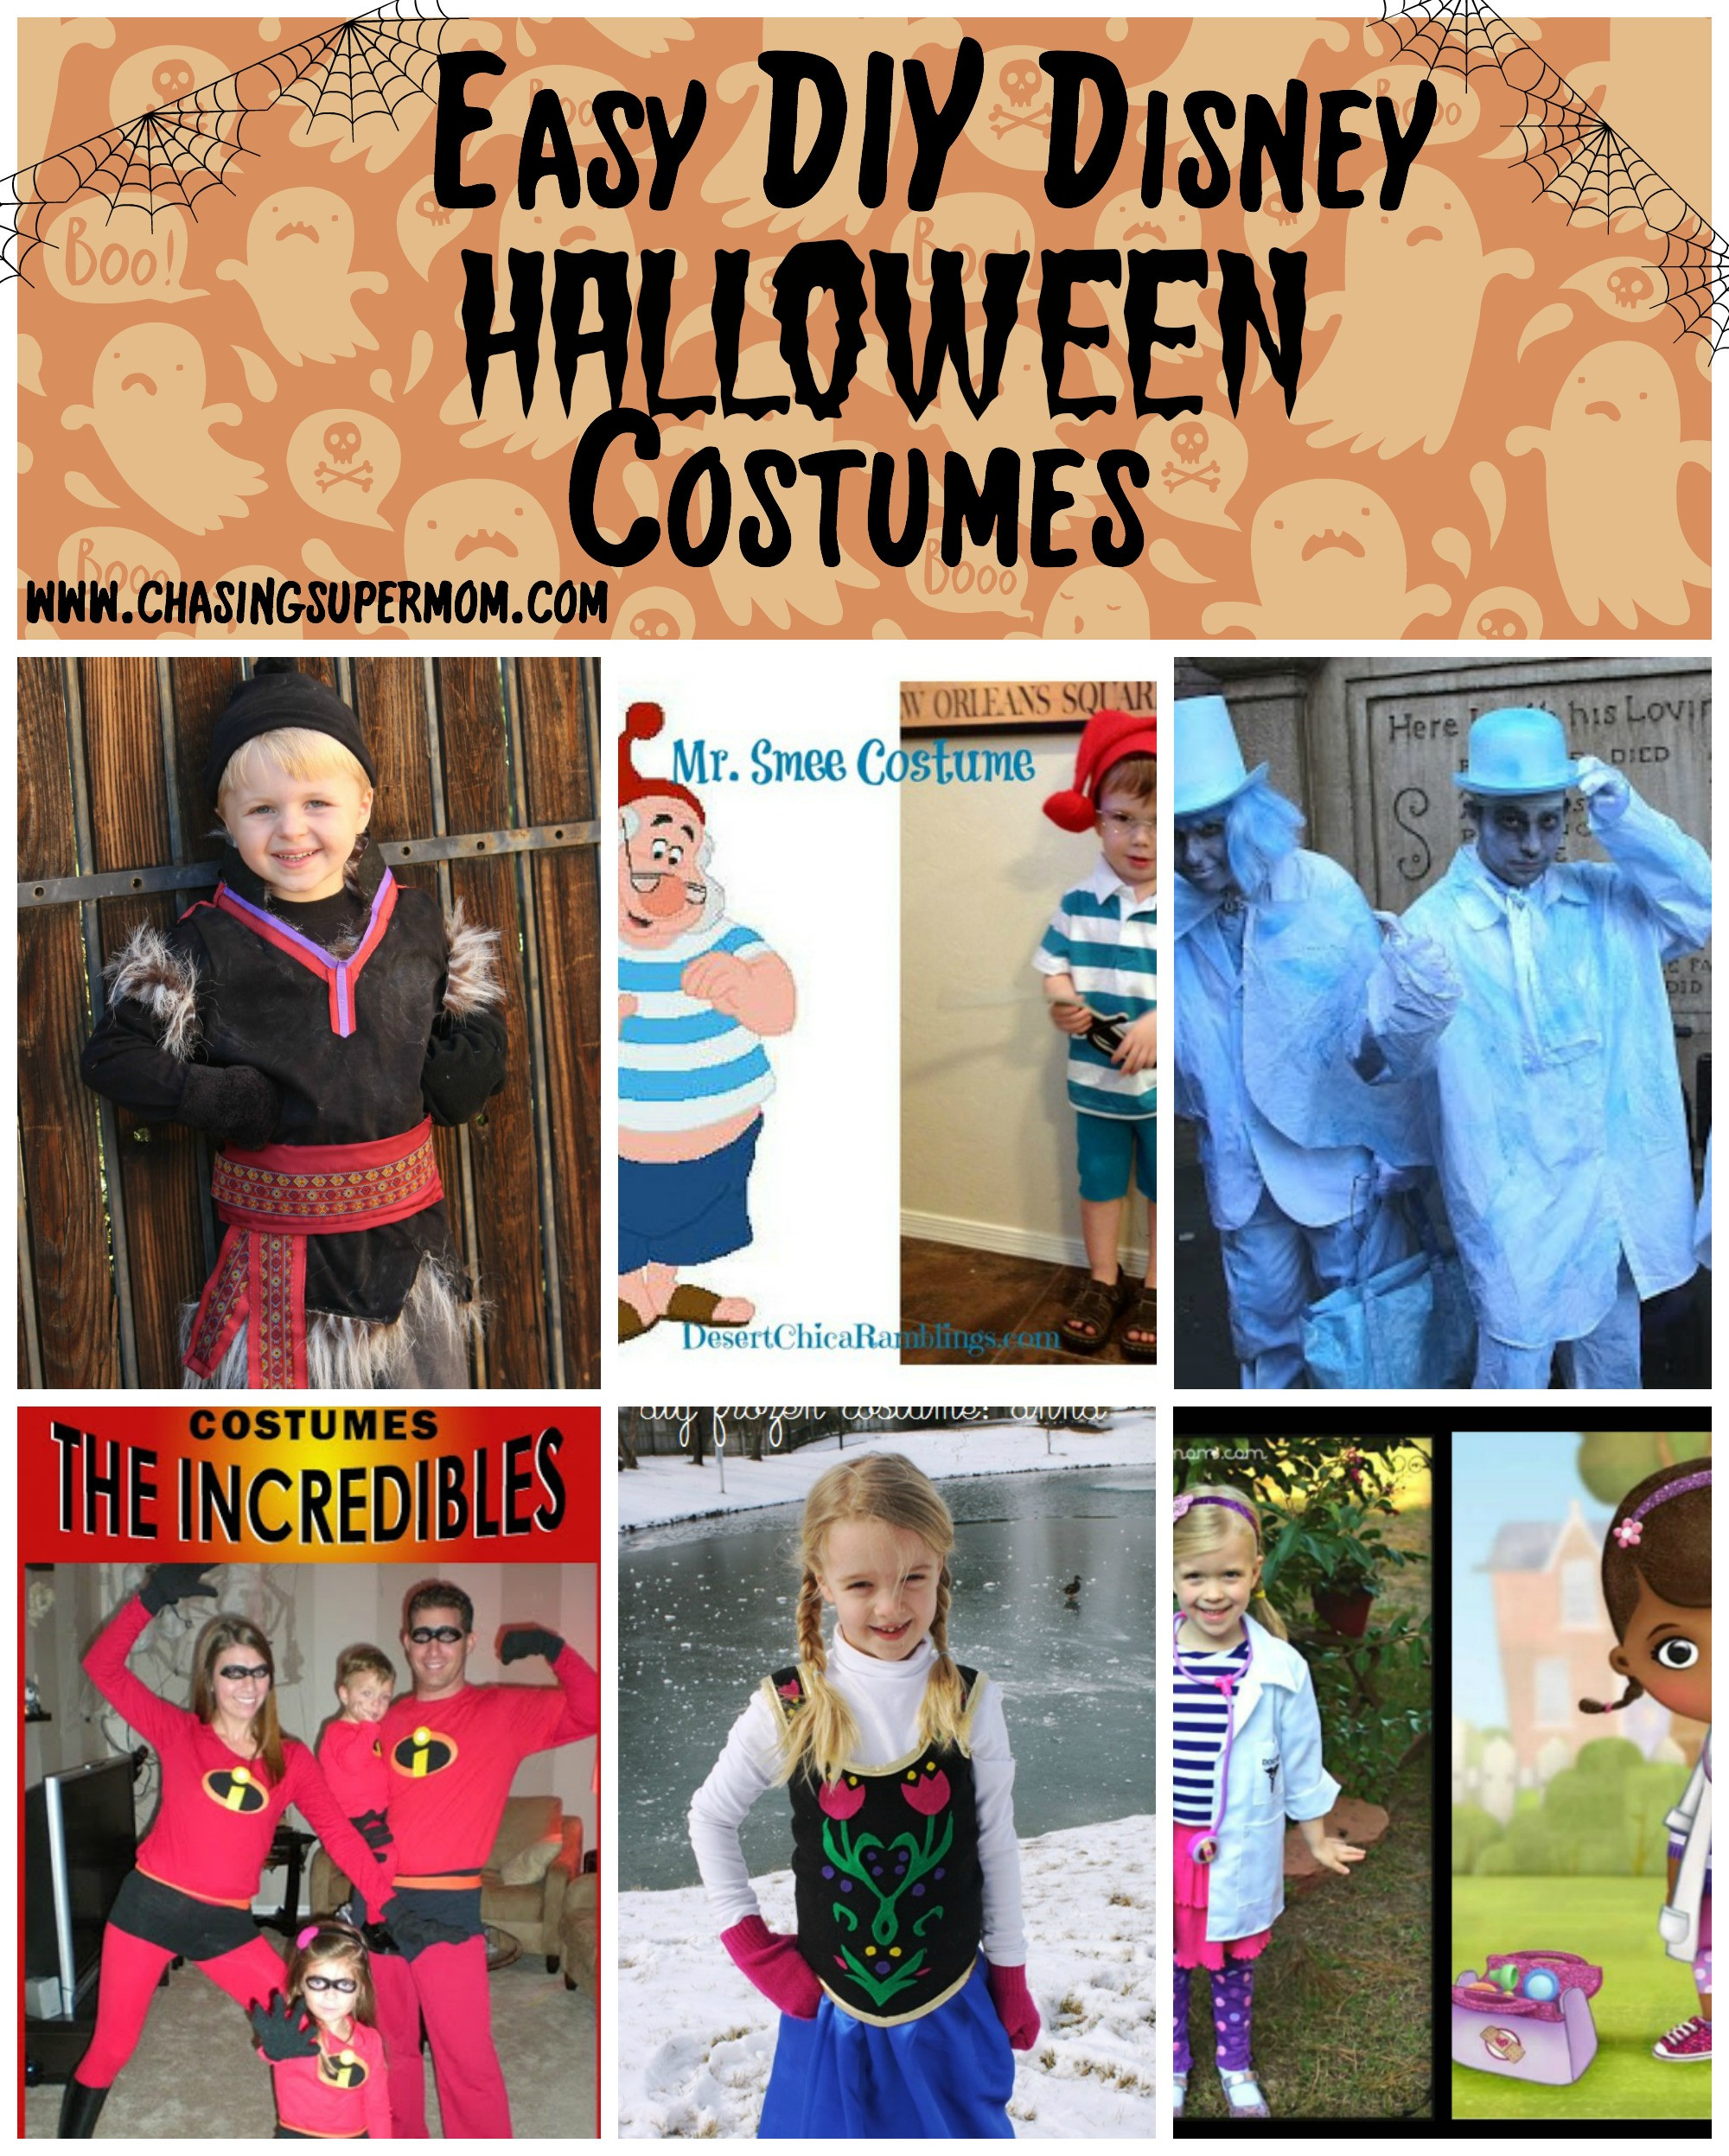 Easy DIY Disney Costumes
 Disney Movies You Need to Watch Before Your Visit to